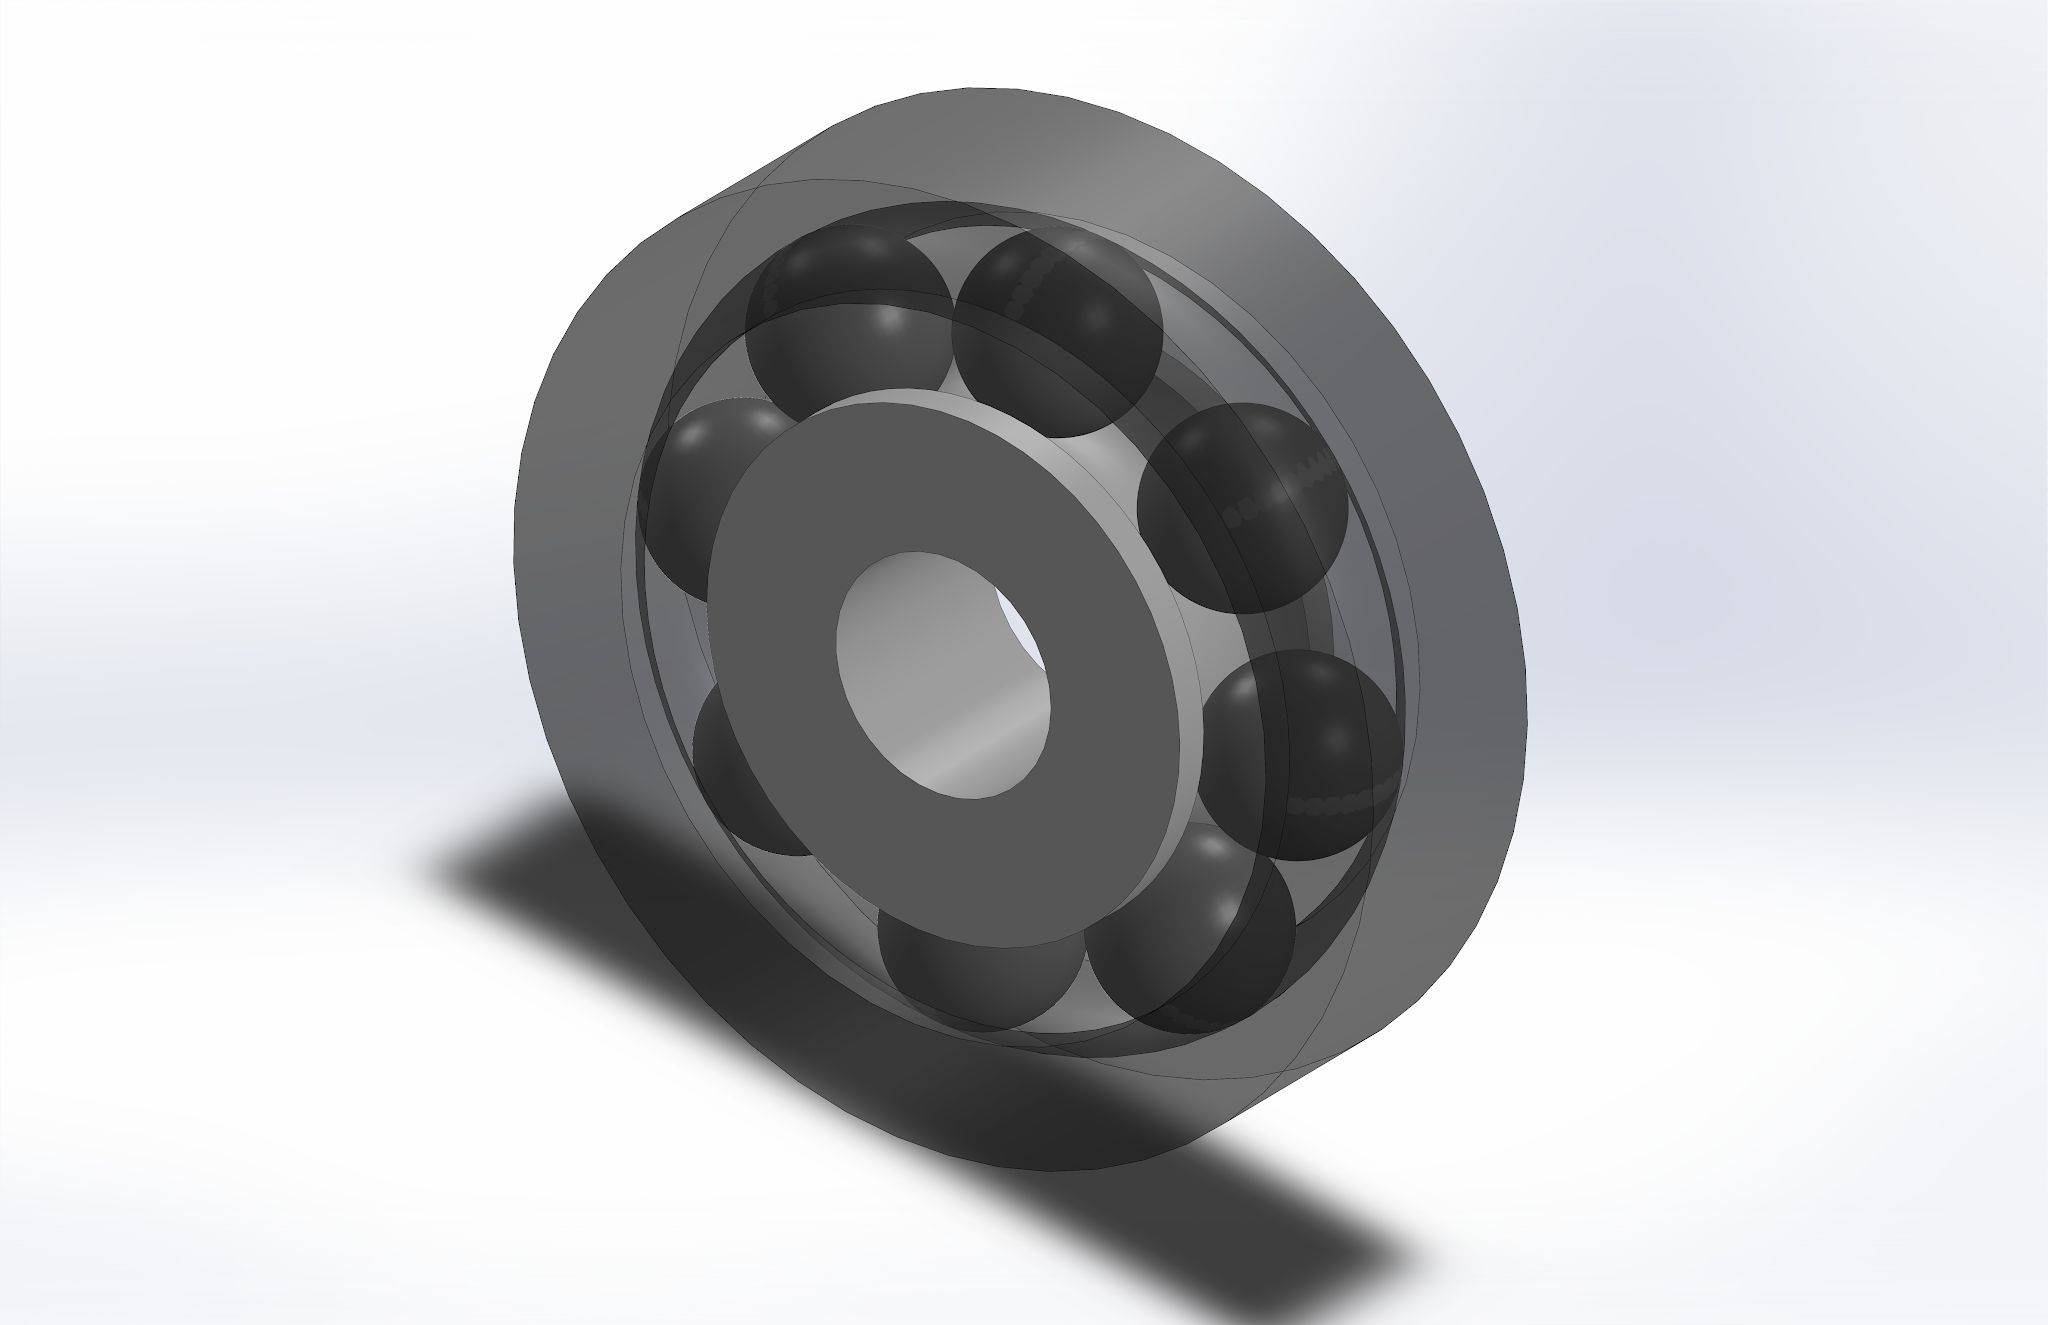 A Typical Ball Bearing Model designed in SOLIDWORKS